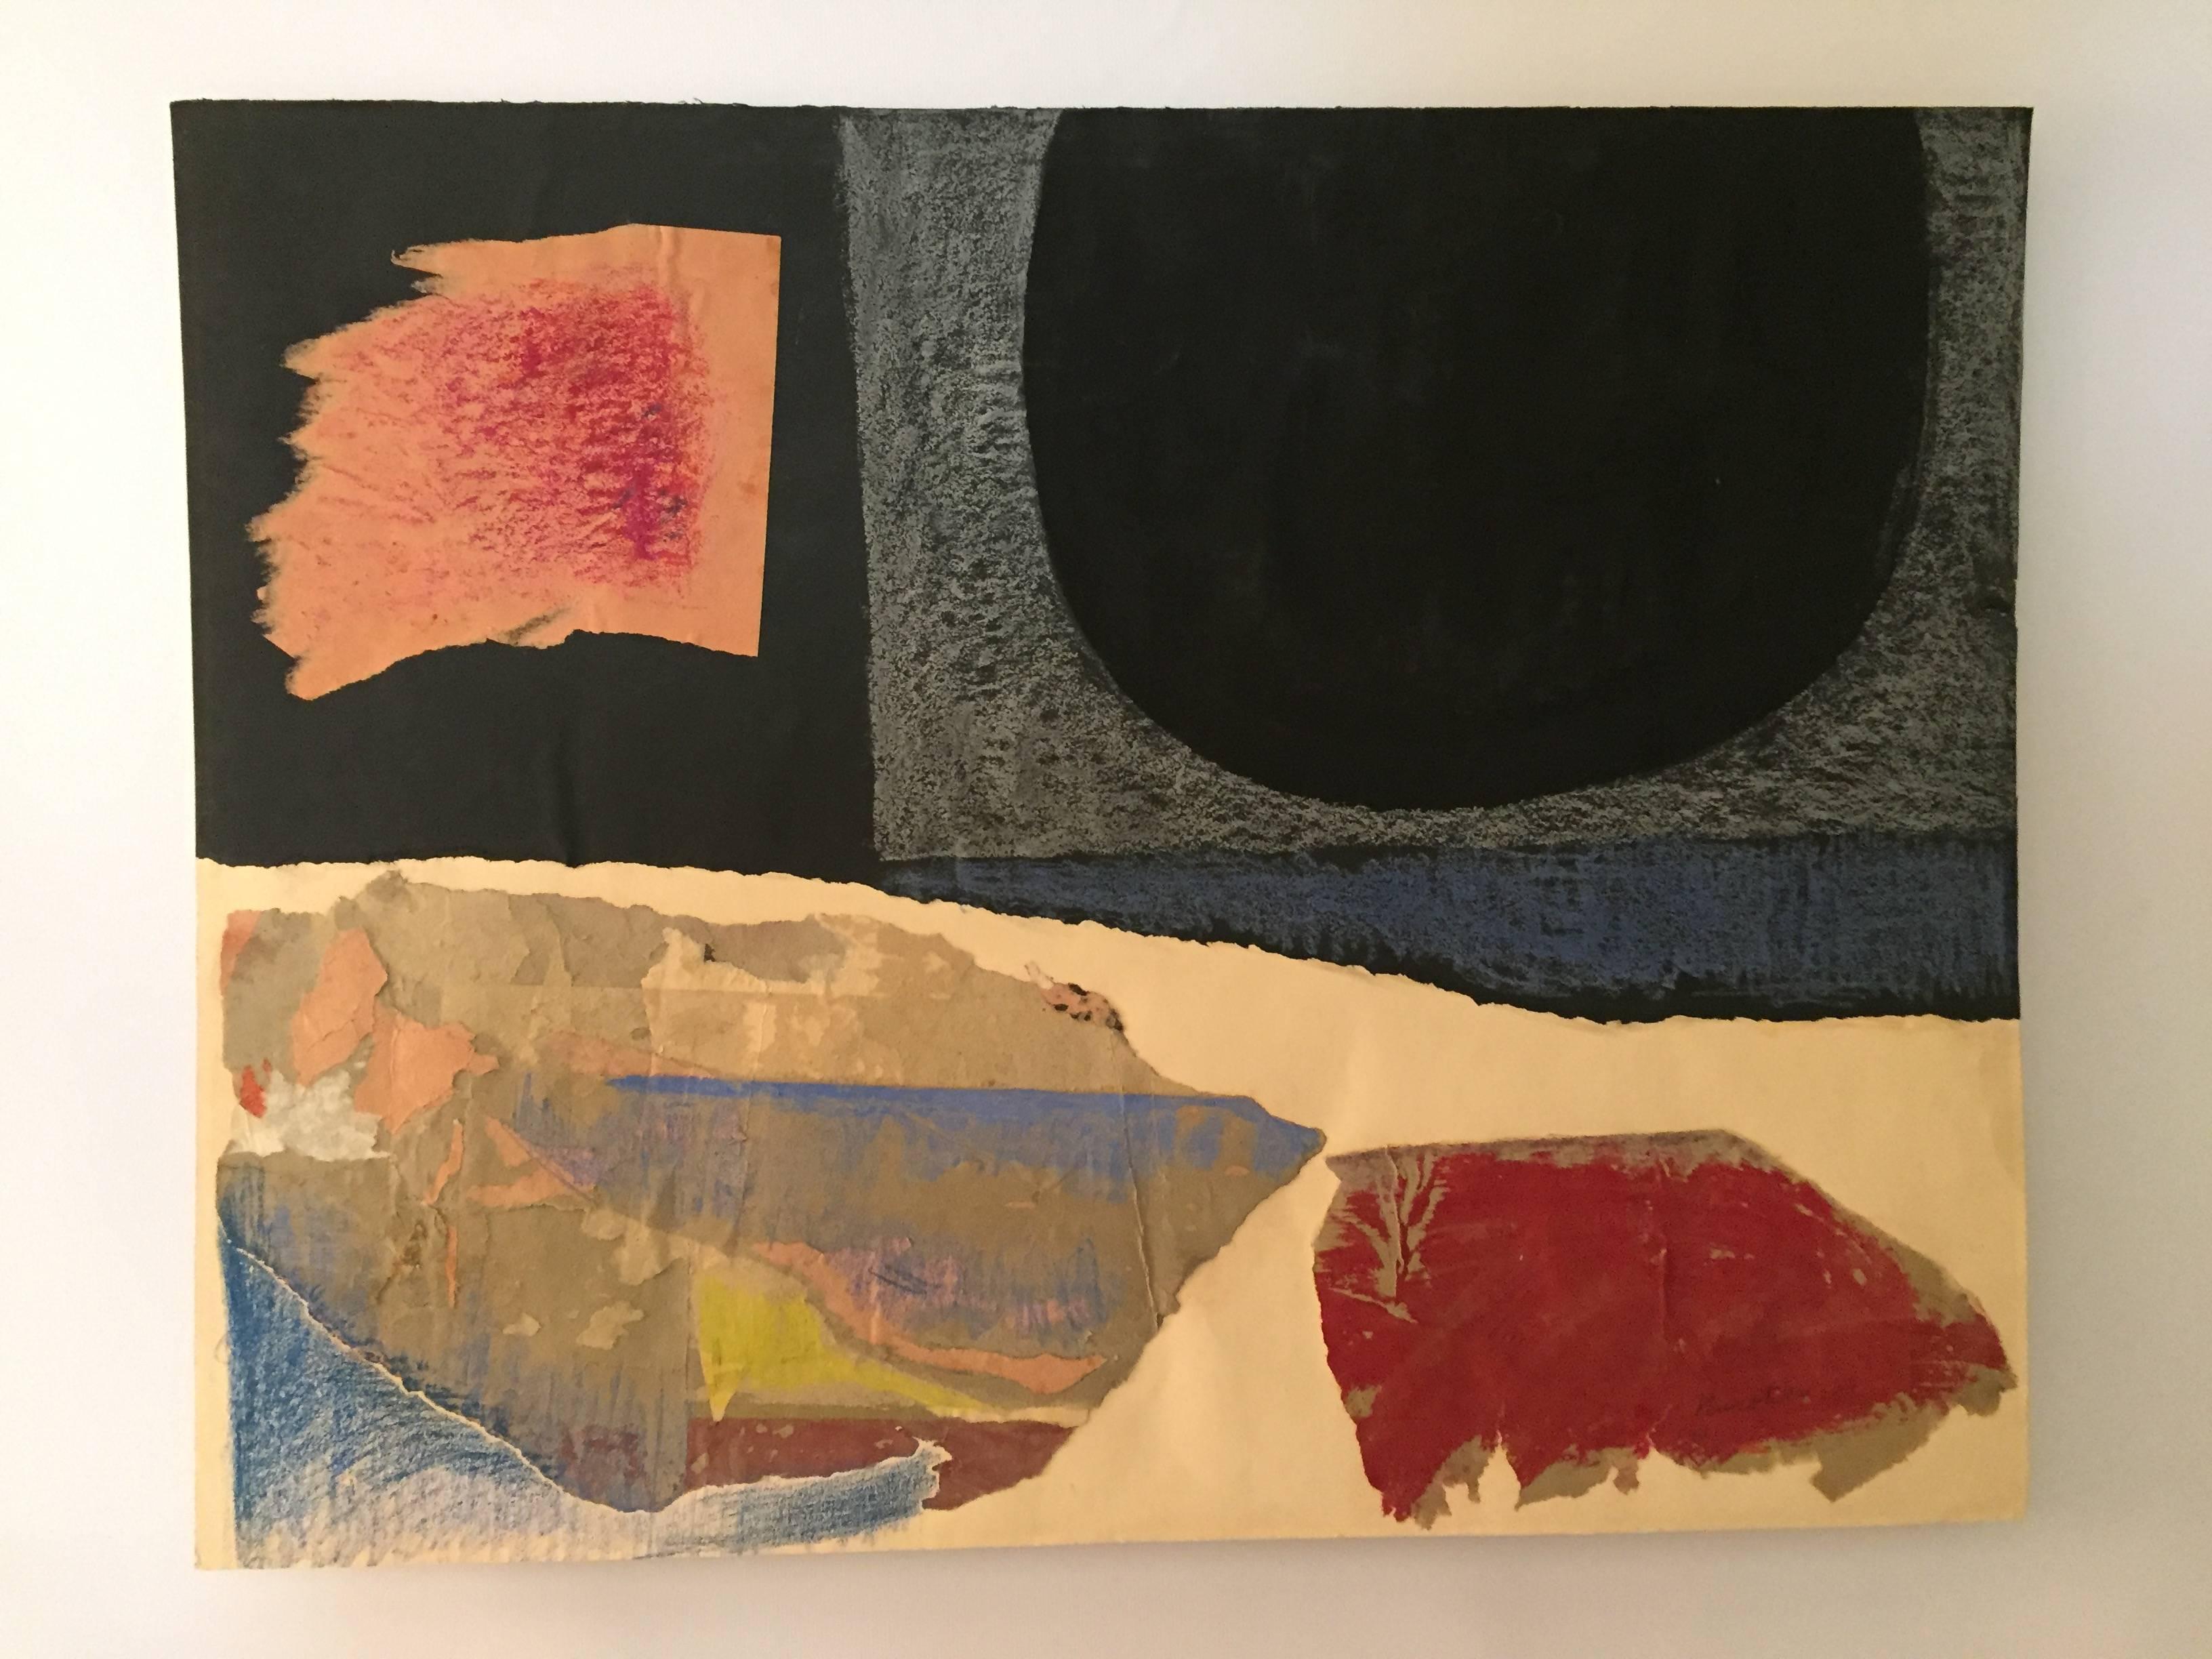 Signed and dated lower right, Norotzky, 56. This wonderful work was purchased from a prominent Mid-town Manhattan estate. Unframed and unmounted. It's in very good original condition. The artist has rendered this abstract piece with paper,